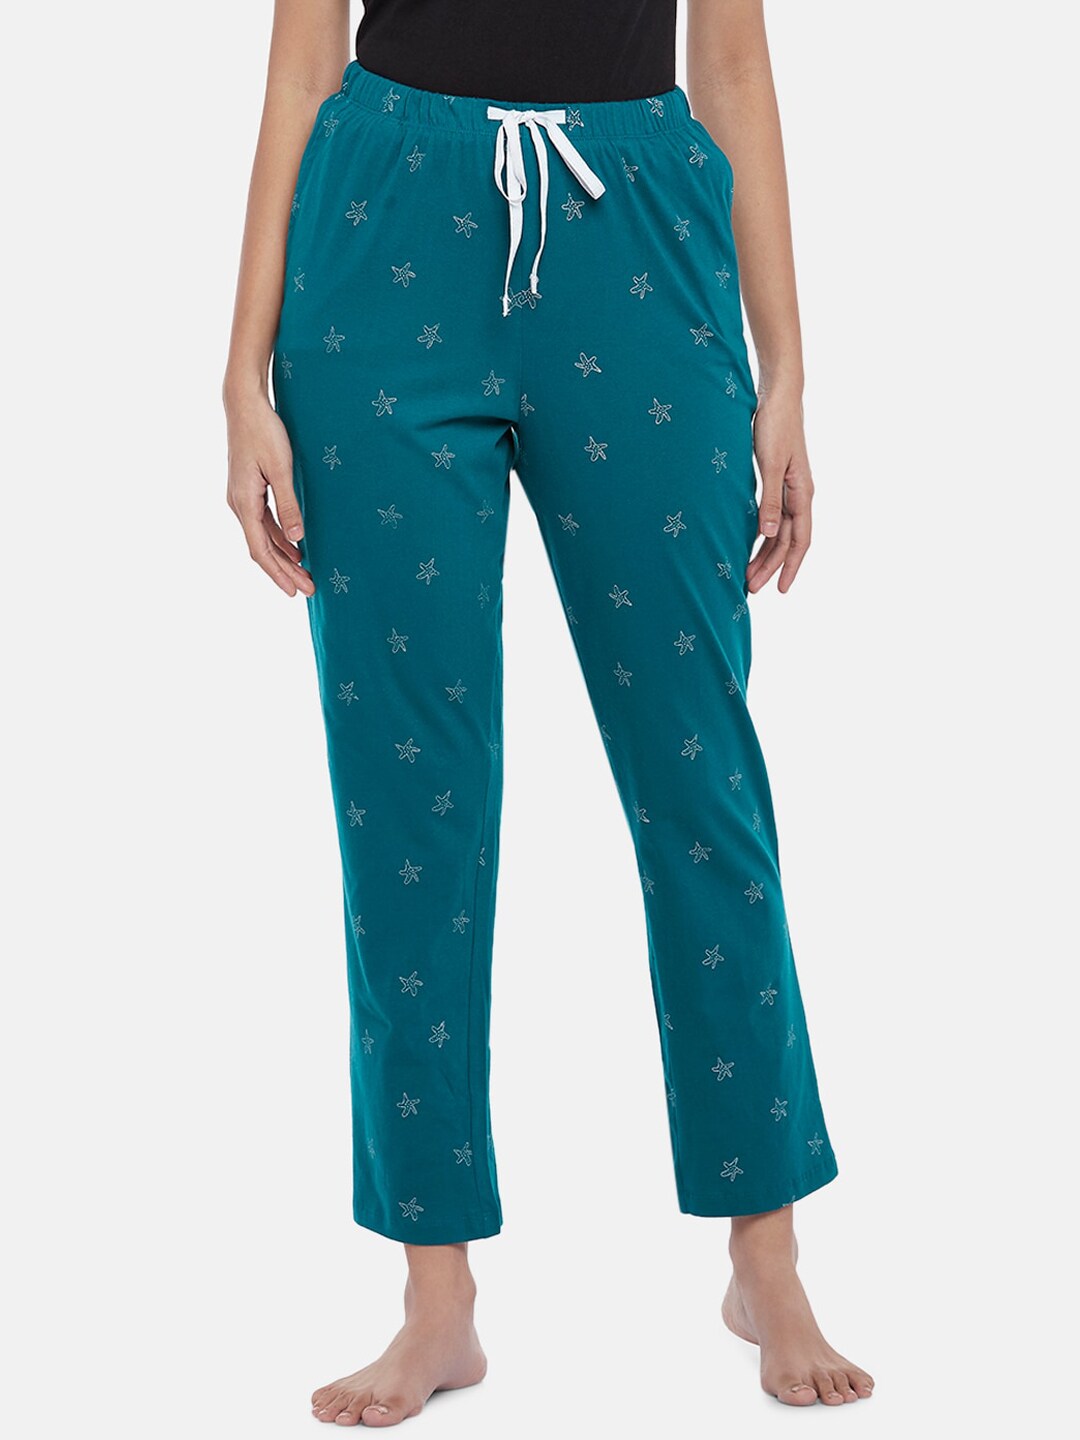 Dreamz by Pantaloons Woman Blue Printed Lounge Pants Price in India